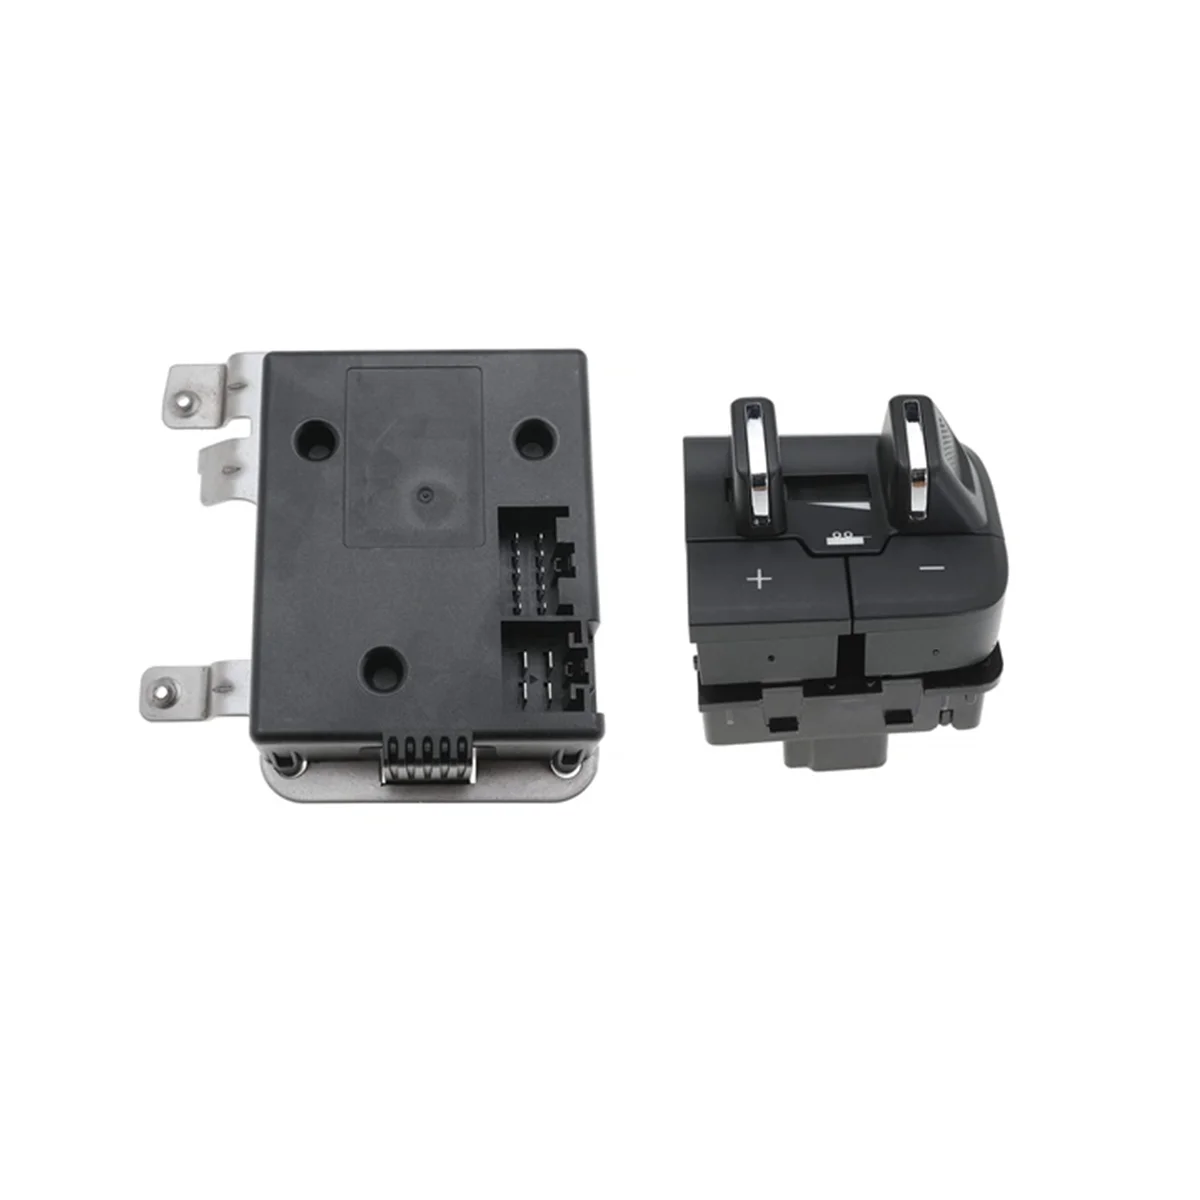 

82213474AB Car Integrated Trailer Brake Control Module with Switch for Dodge Ram 1500 2500 3500 4500 5500 2013